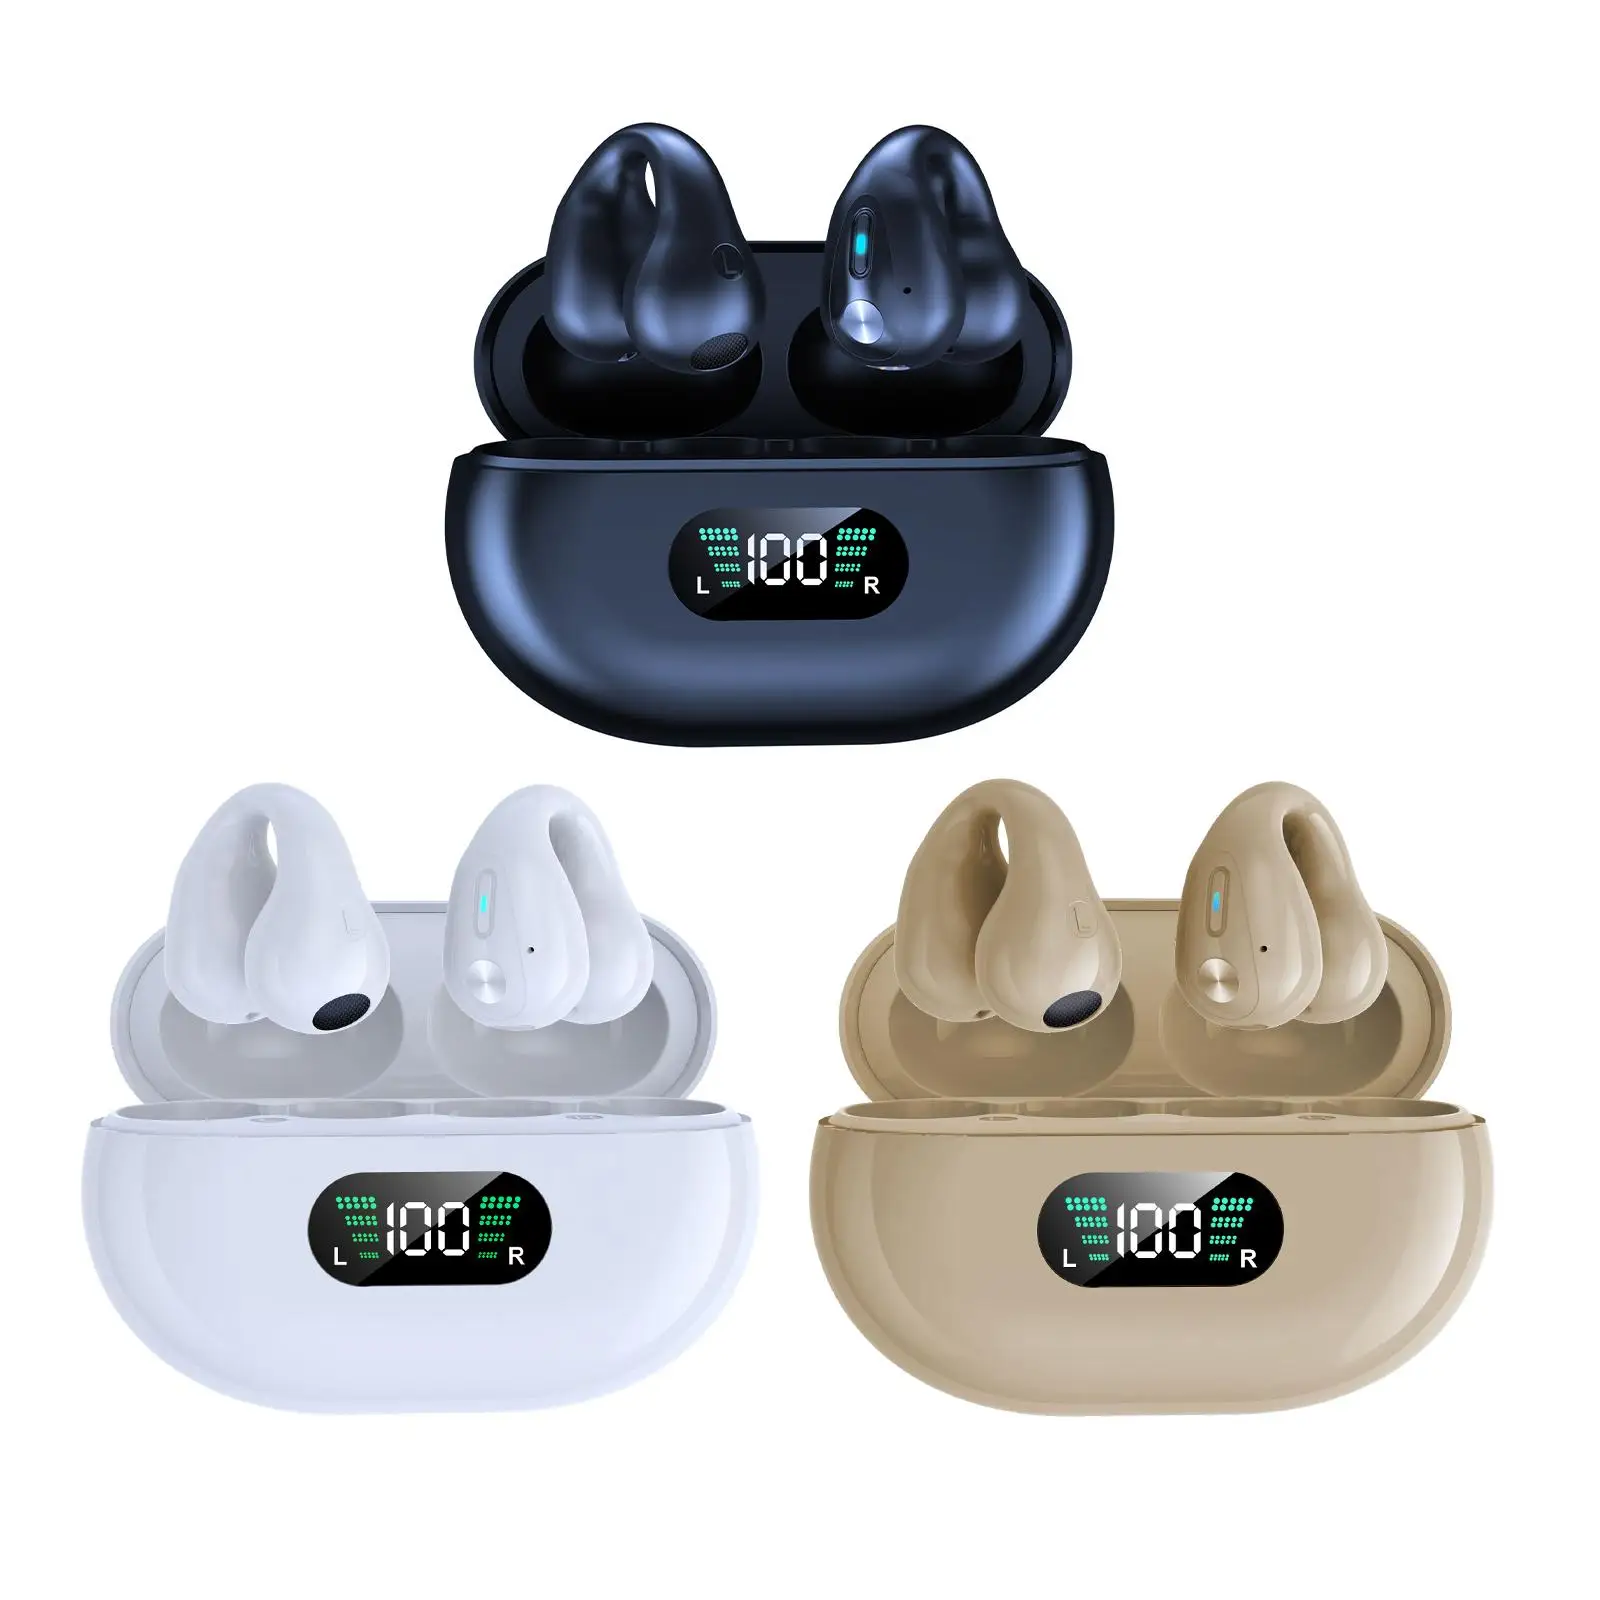 Ear Clip Headphones Stereo Sound with Charging Case Noise Reduction Handsfree Calling V5.3 Headsets for Running Driving